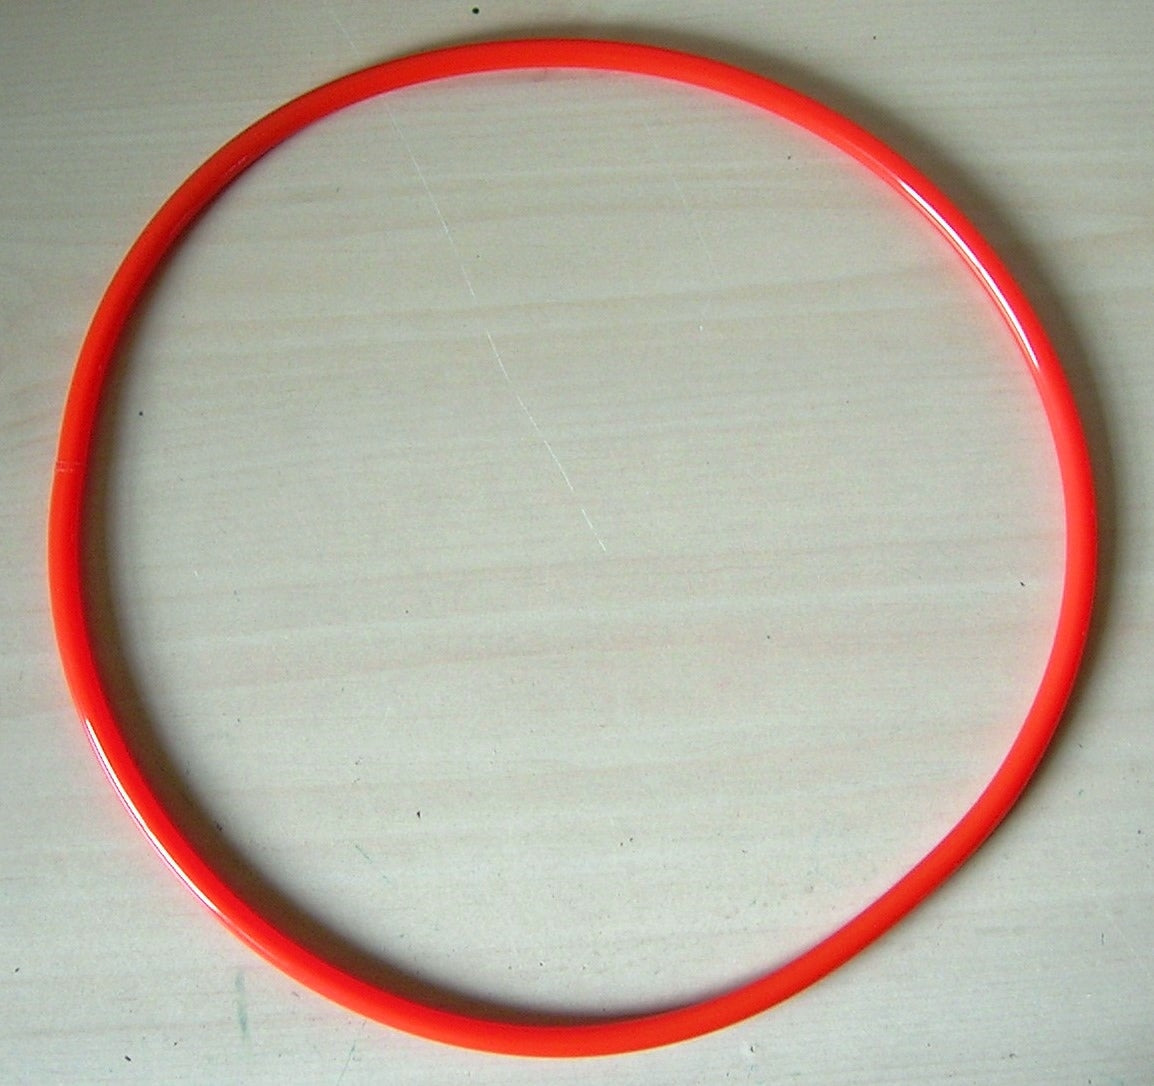 ROUND DRIVE BELT FOR ANCO 14" BAND SAW